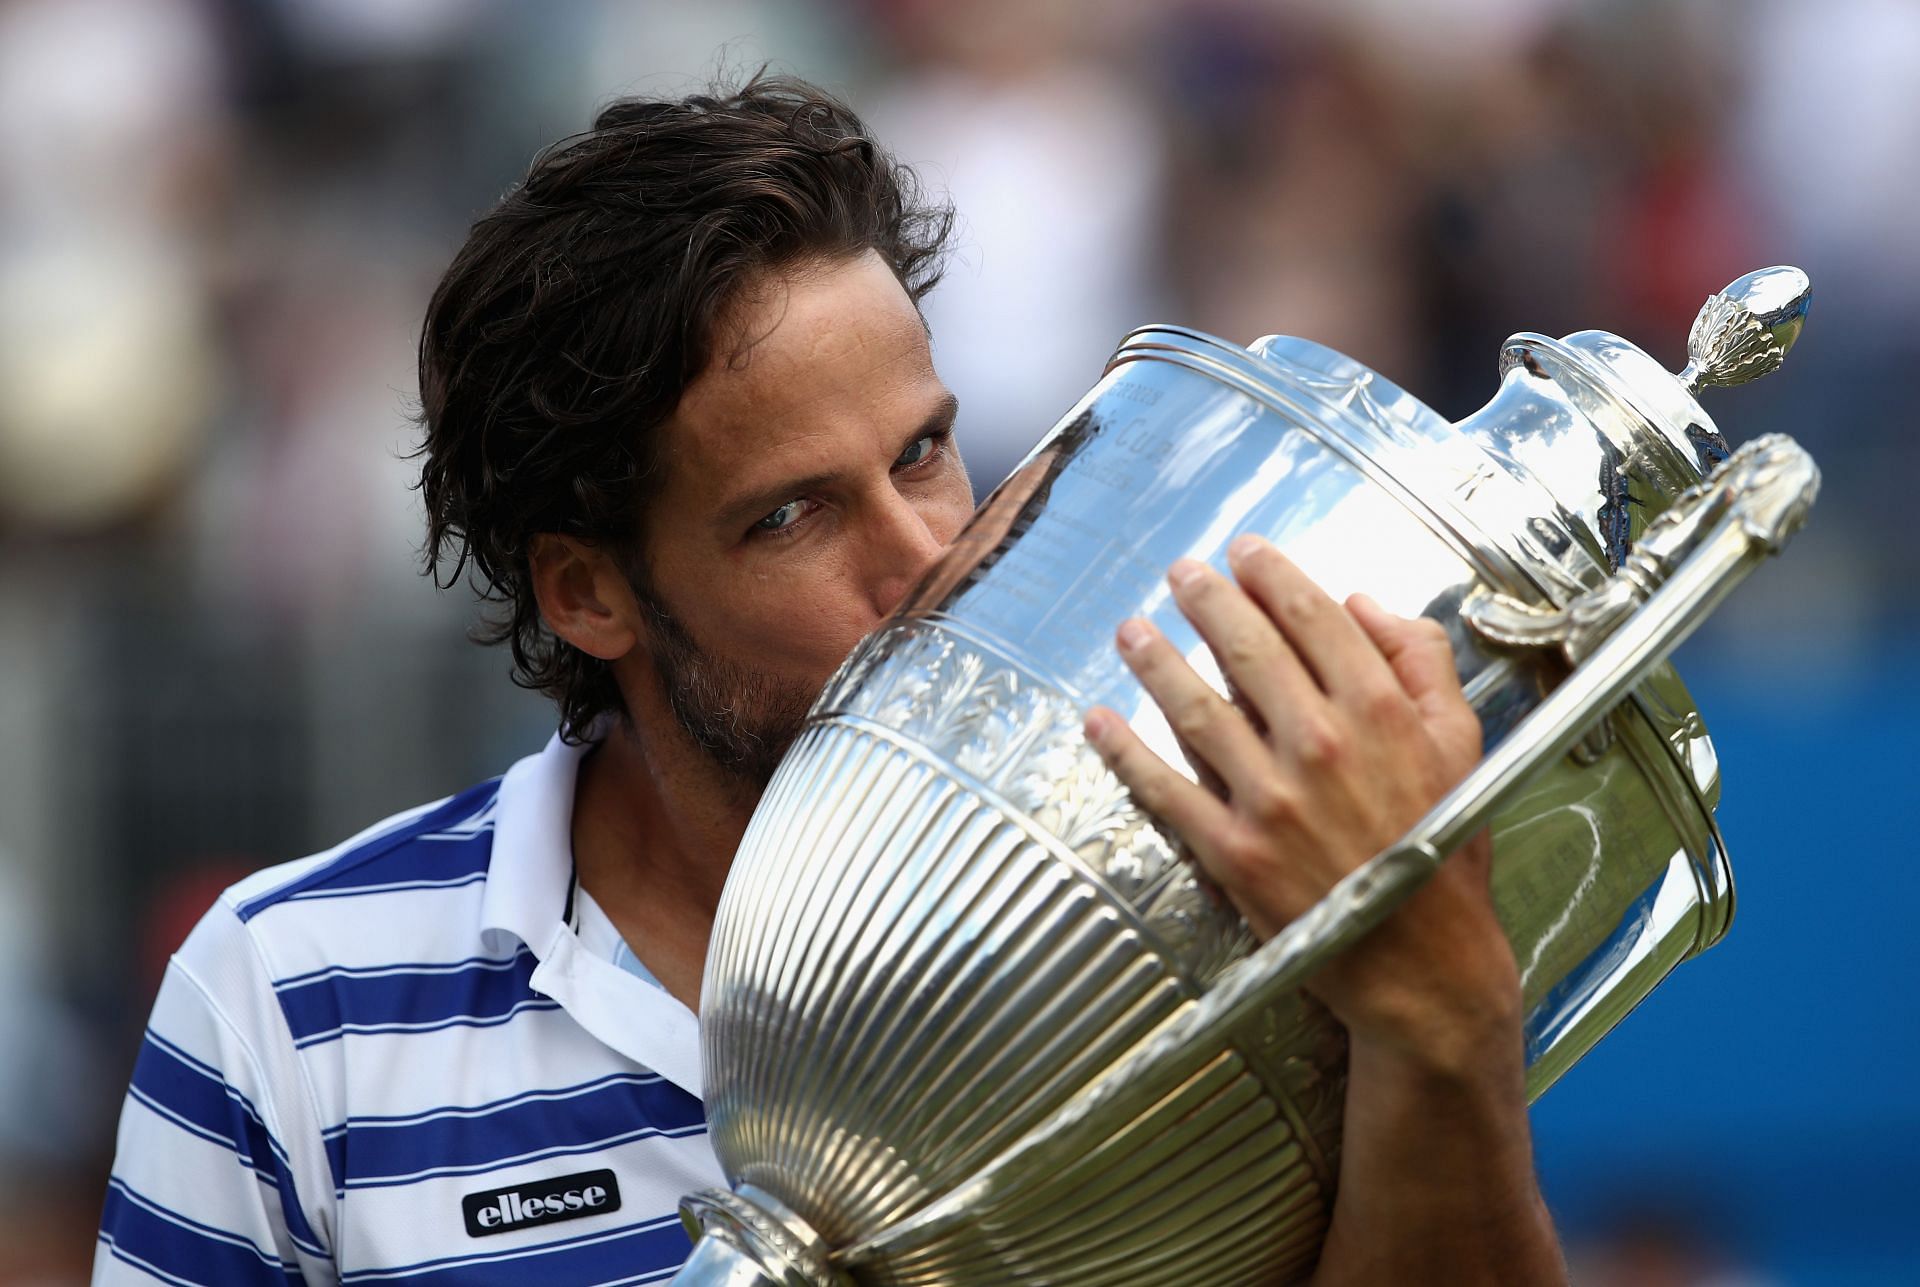 Feliciano Lopez after winning the 2017 Aegon Championships